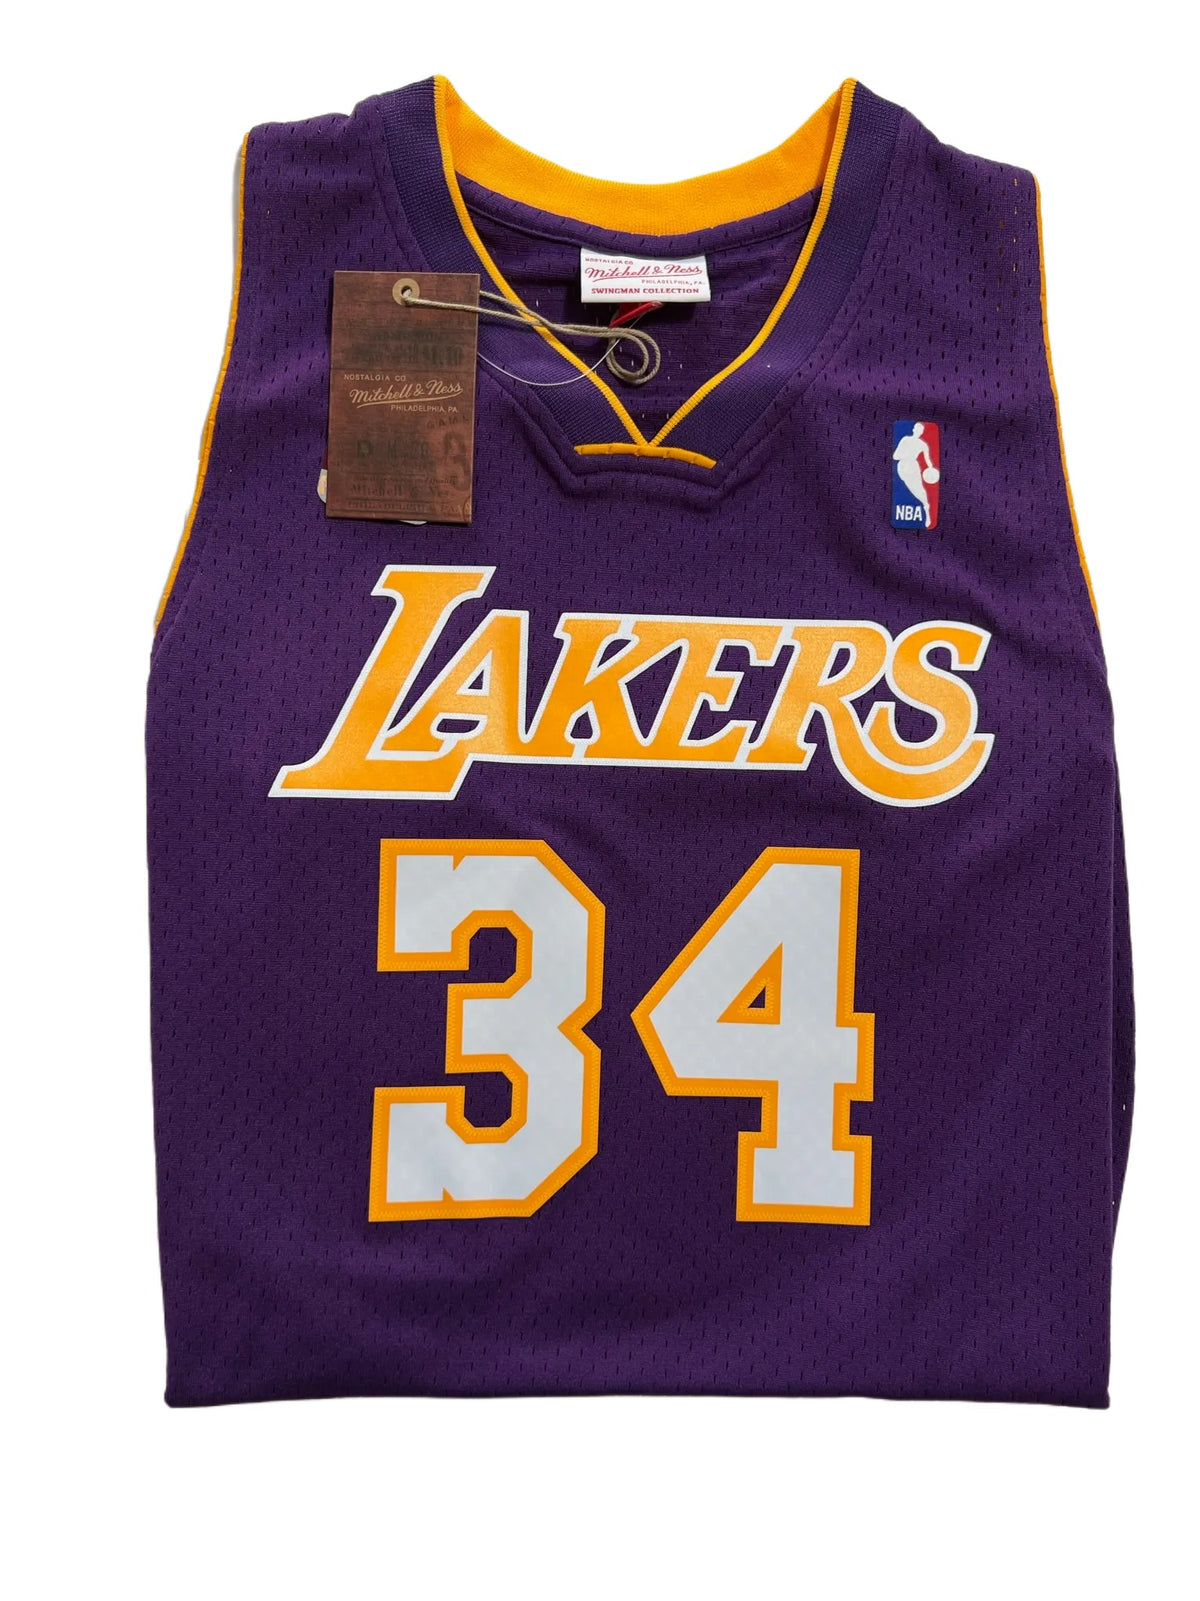 Hardwood Classics- "Lakers" Basketball Jersey New With Tags!